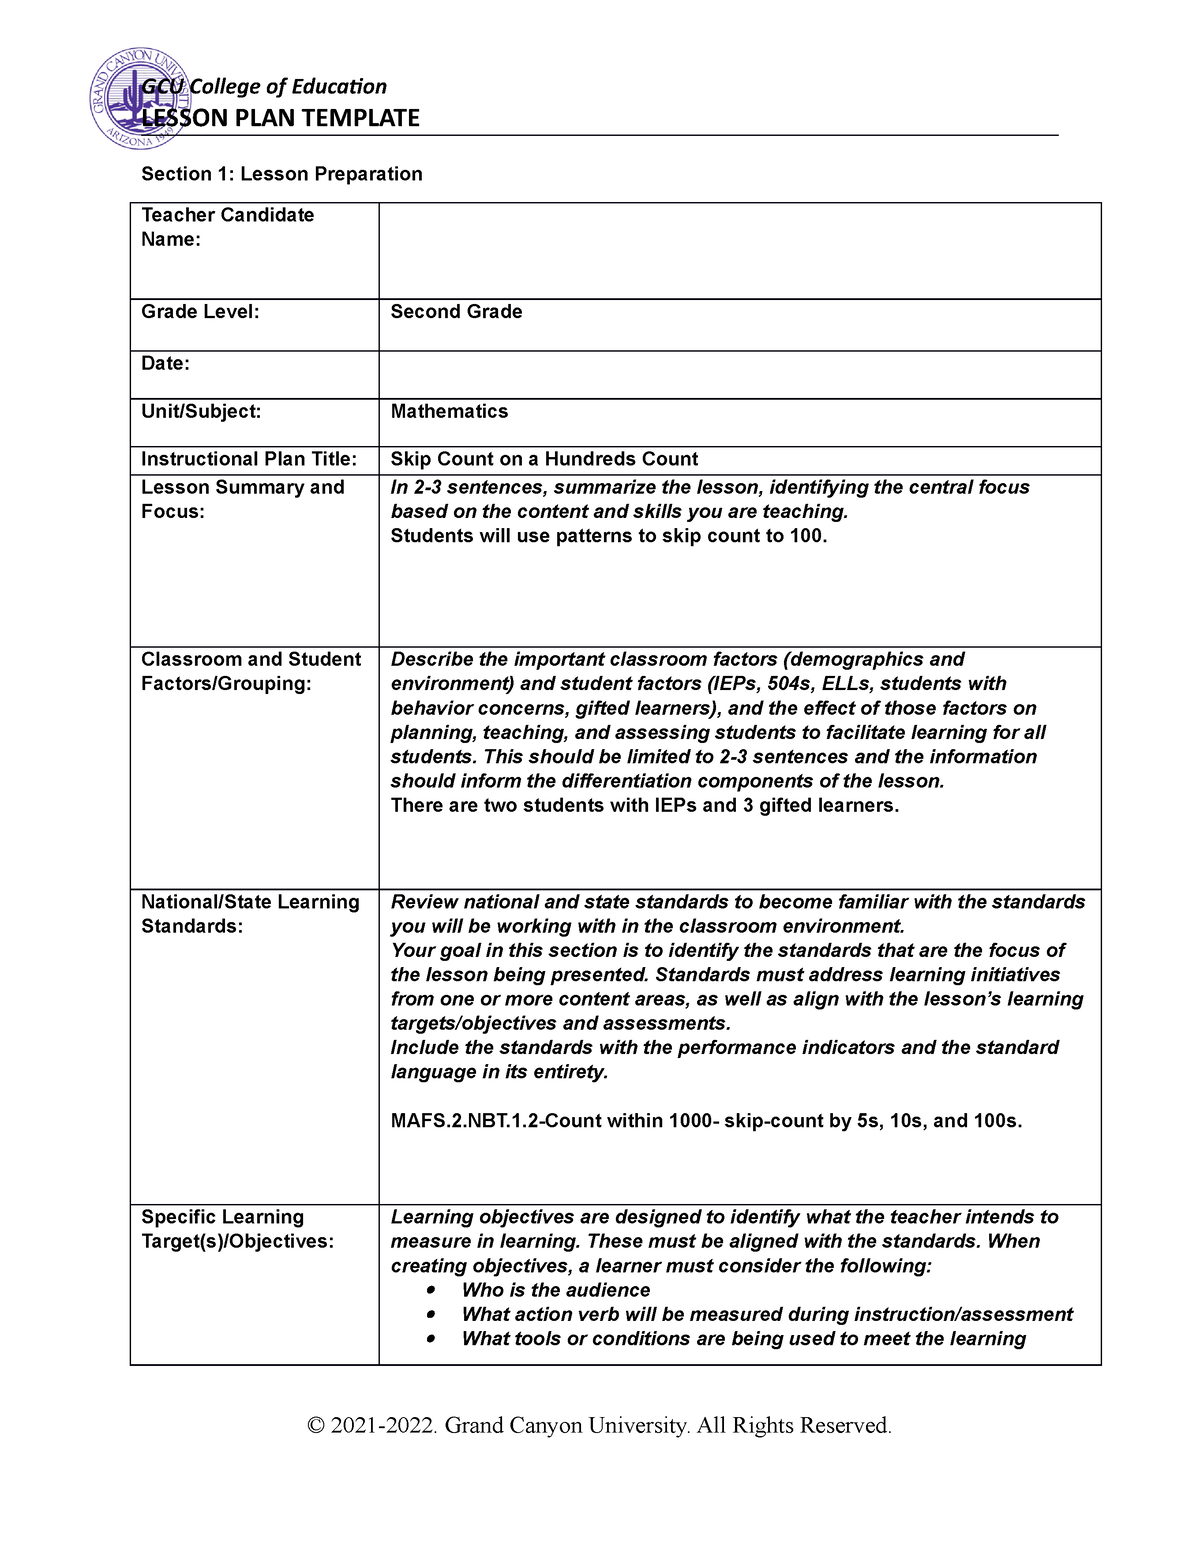 coe-lesson-plan-template-lesson-plan-template-section-1-lesson